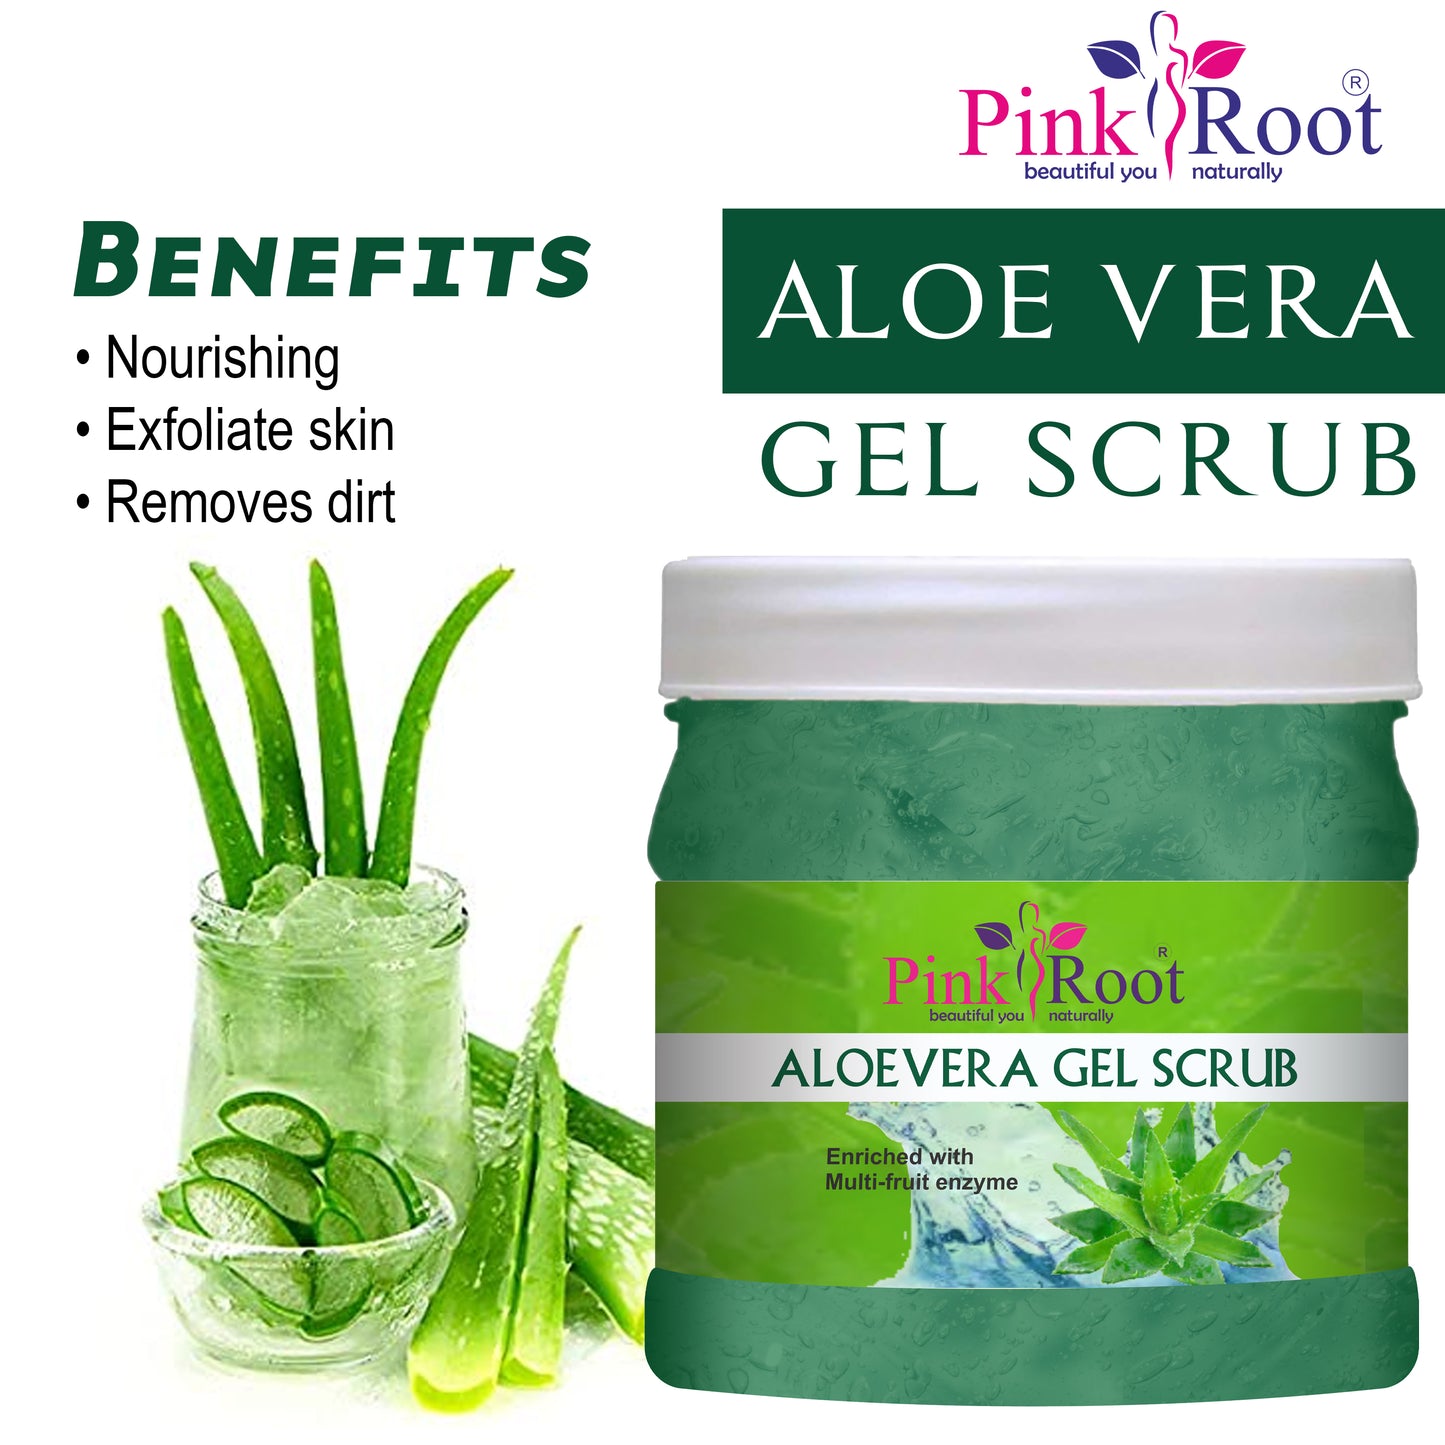 Pink Root Aloevera Eco Facial Kit, 500ml Pack of 4, for Anti Acne, Pimples Control, Tan Removal, Dead Skin Removal, Nourishing & Moisturising Skin